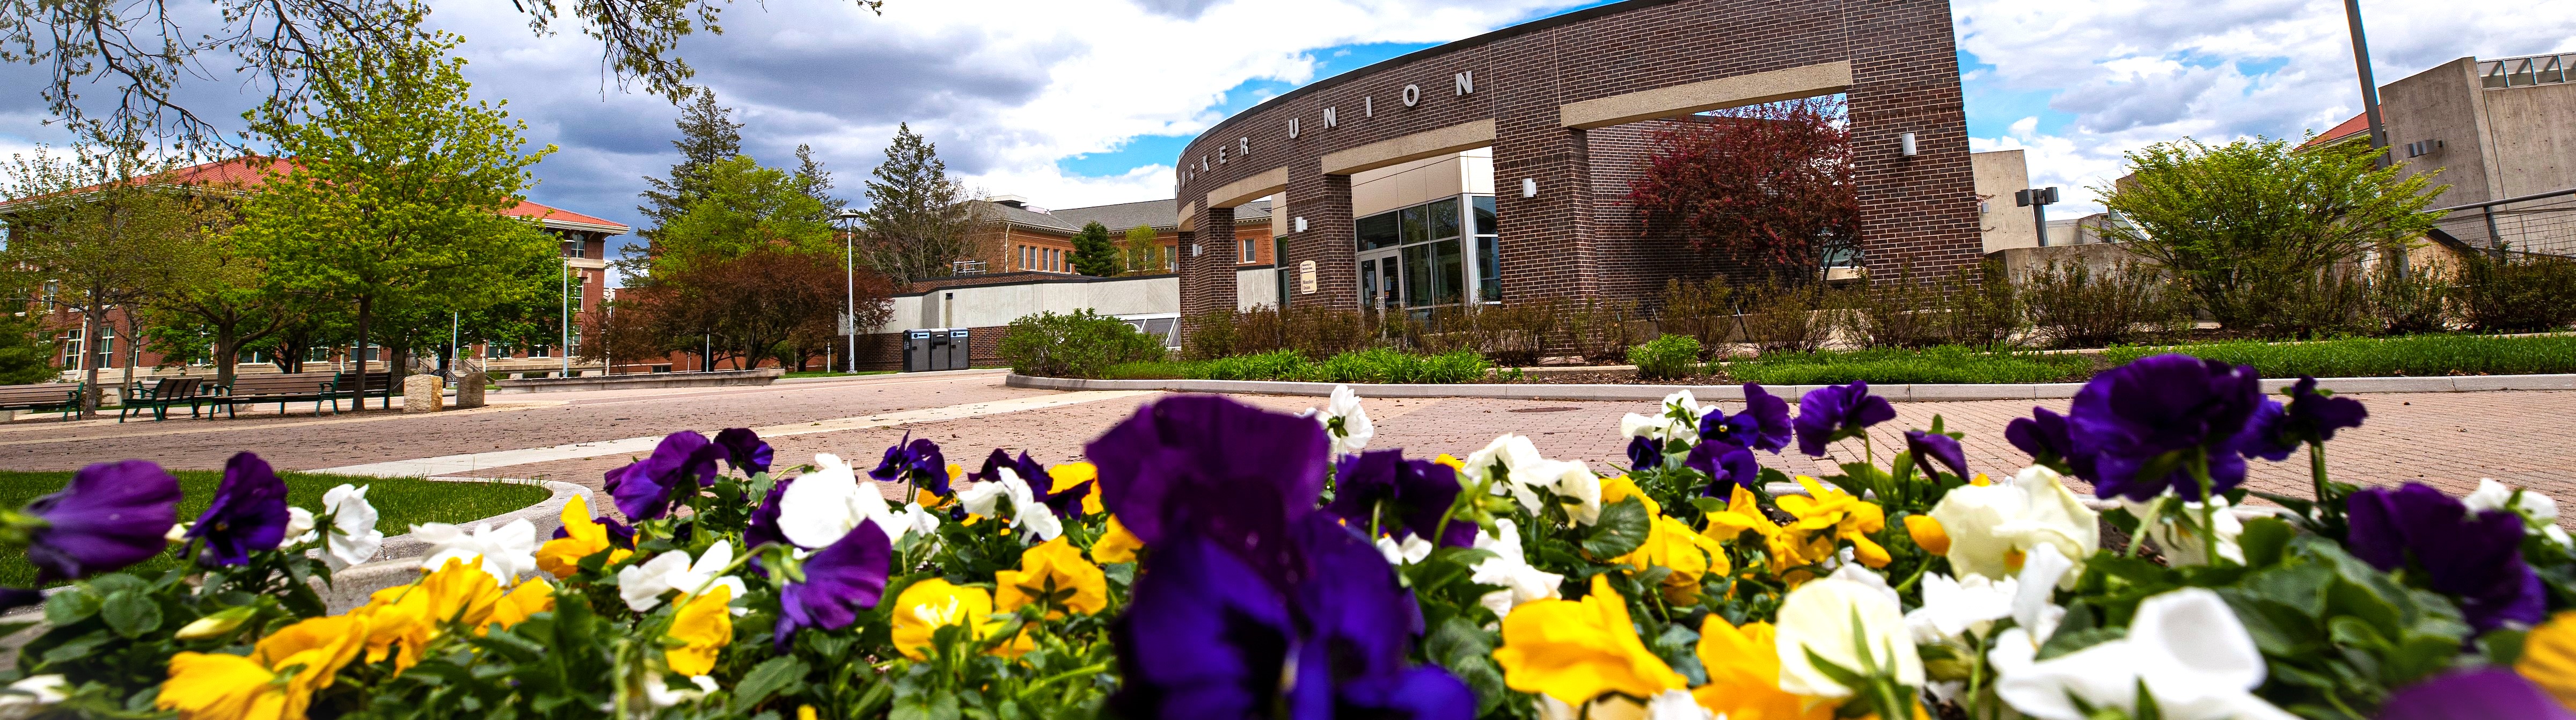 image of flowers in front of Maucker Union